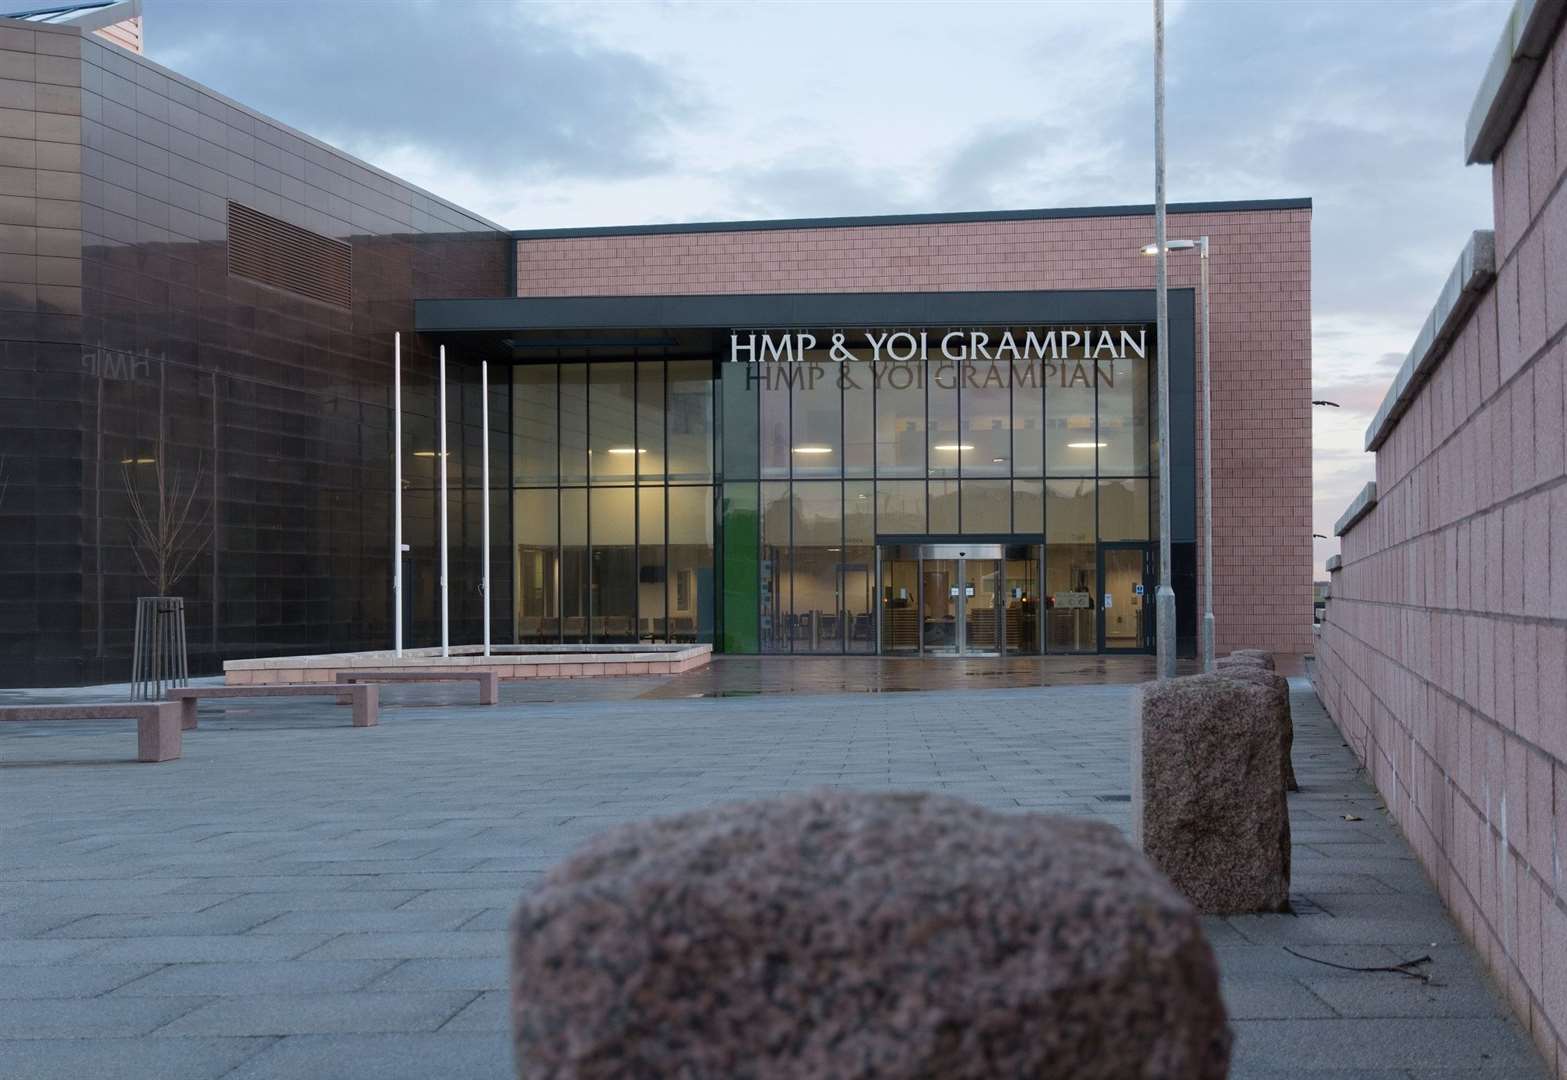 New figures have shown prison officers working at HMP Grampian have been assaulted by inmates almost 100 times in the last five years.